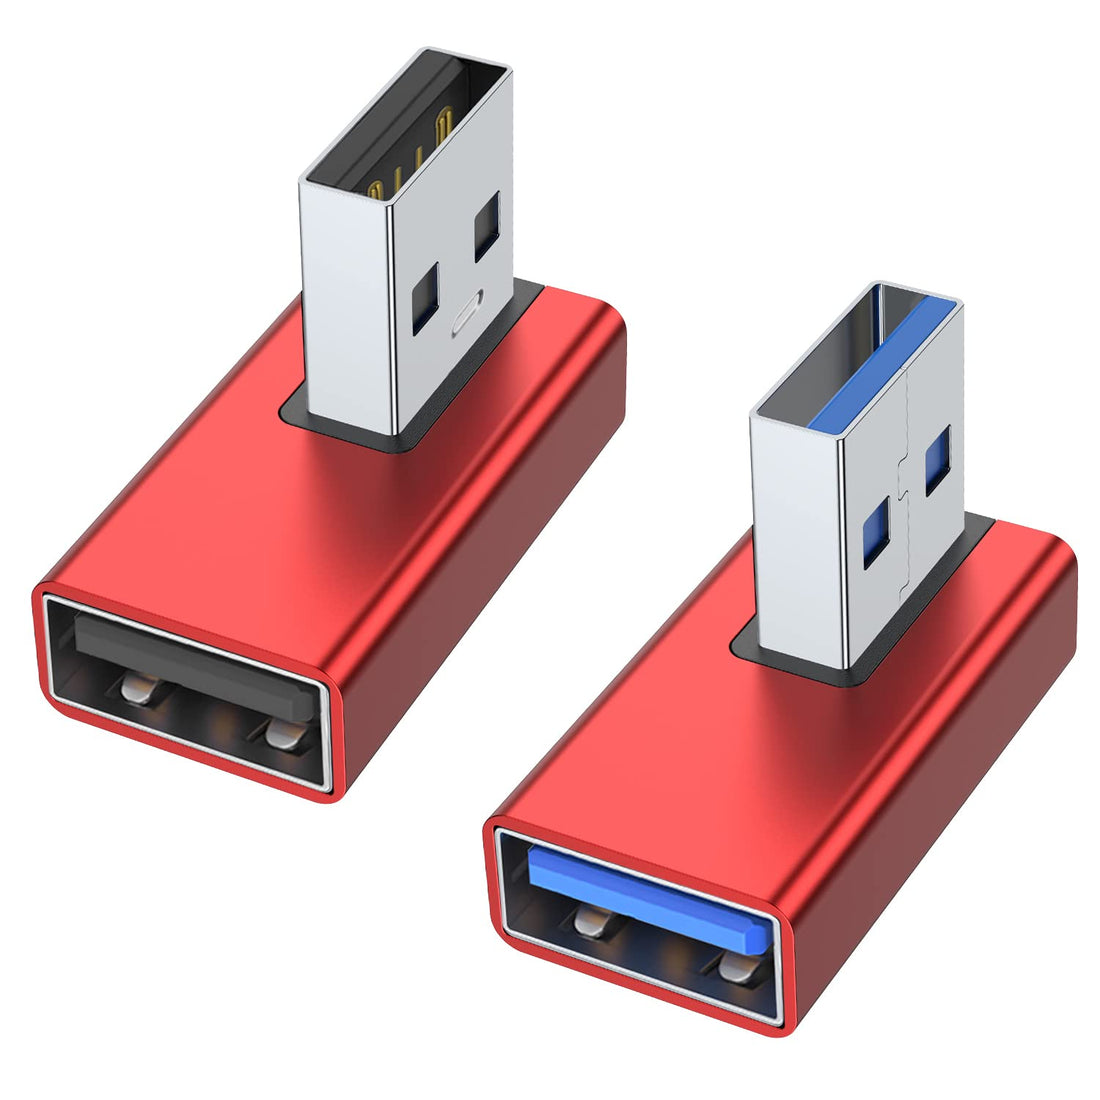 AreMe 90 Degree USB 3.0 Adapter 2 Pack, Left and Right Angle USB A Male to Female Converter Extender for PC, Laptop, USB A Charger, Power Bank and More (Red)